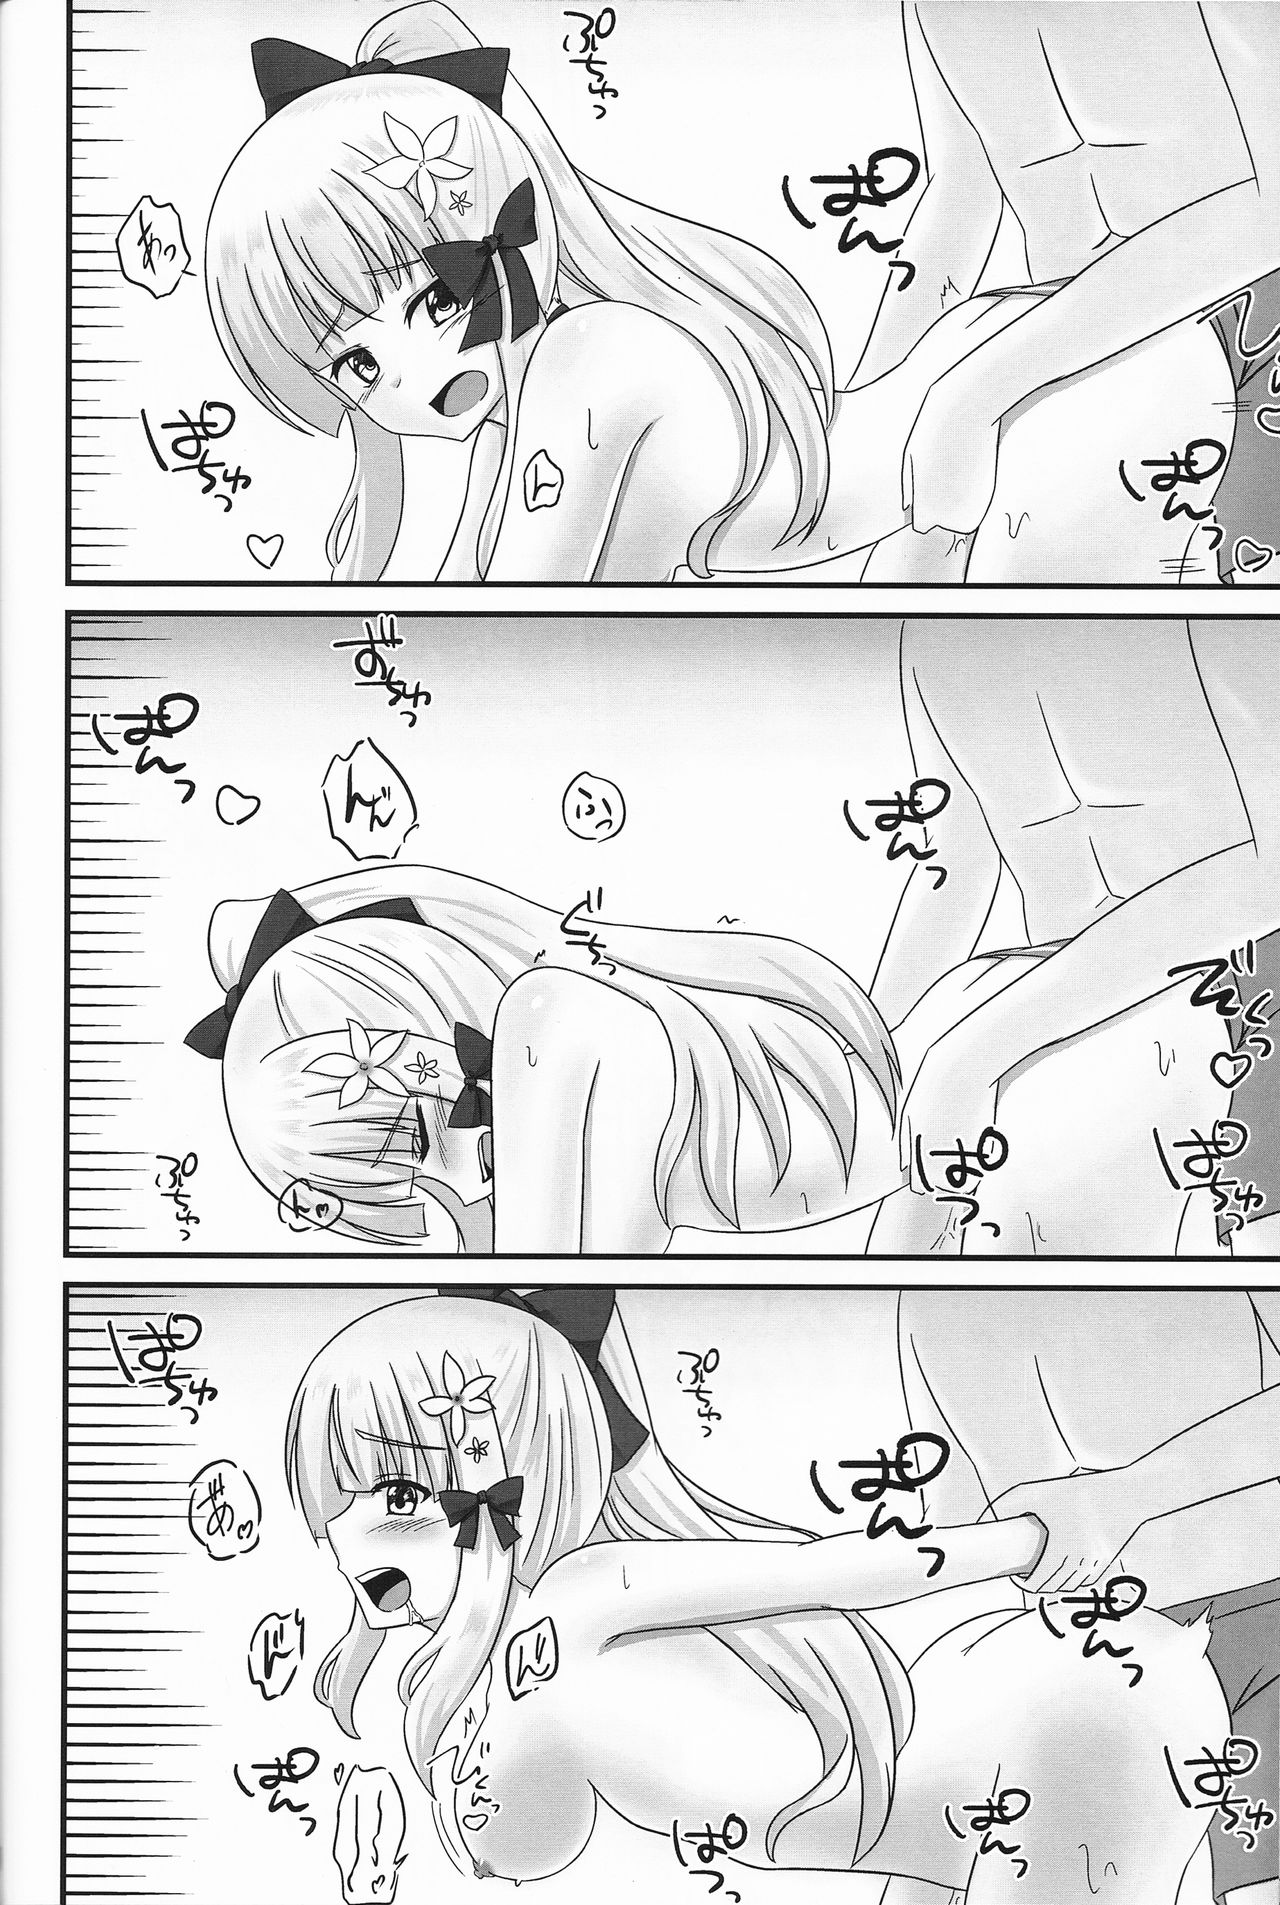 (COMIC1☆16) [A.S.Presents (Kanzaki Alia)] Connecting Select 2 (Princess Connect! Re:Dive) [Chinese] [精甚渣翻] (COMIC1☆16) [A.S.Presents (神咲アリア)] Connecting Select2 (プリンセスコネクト!Re:Dive) [中国翻訳]